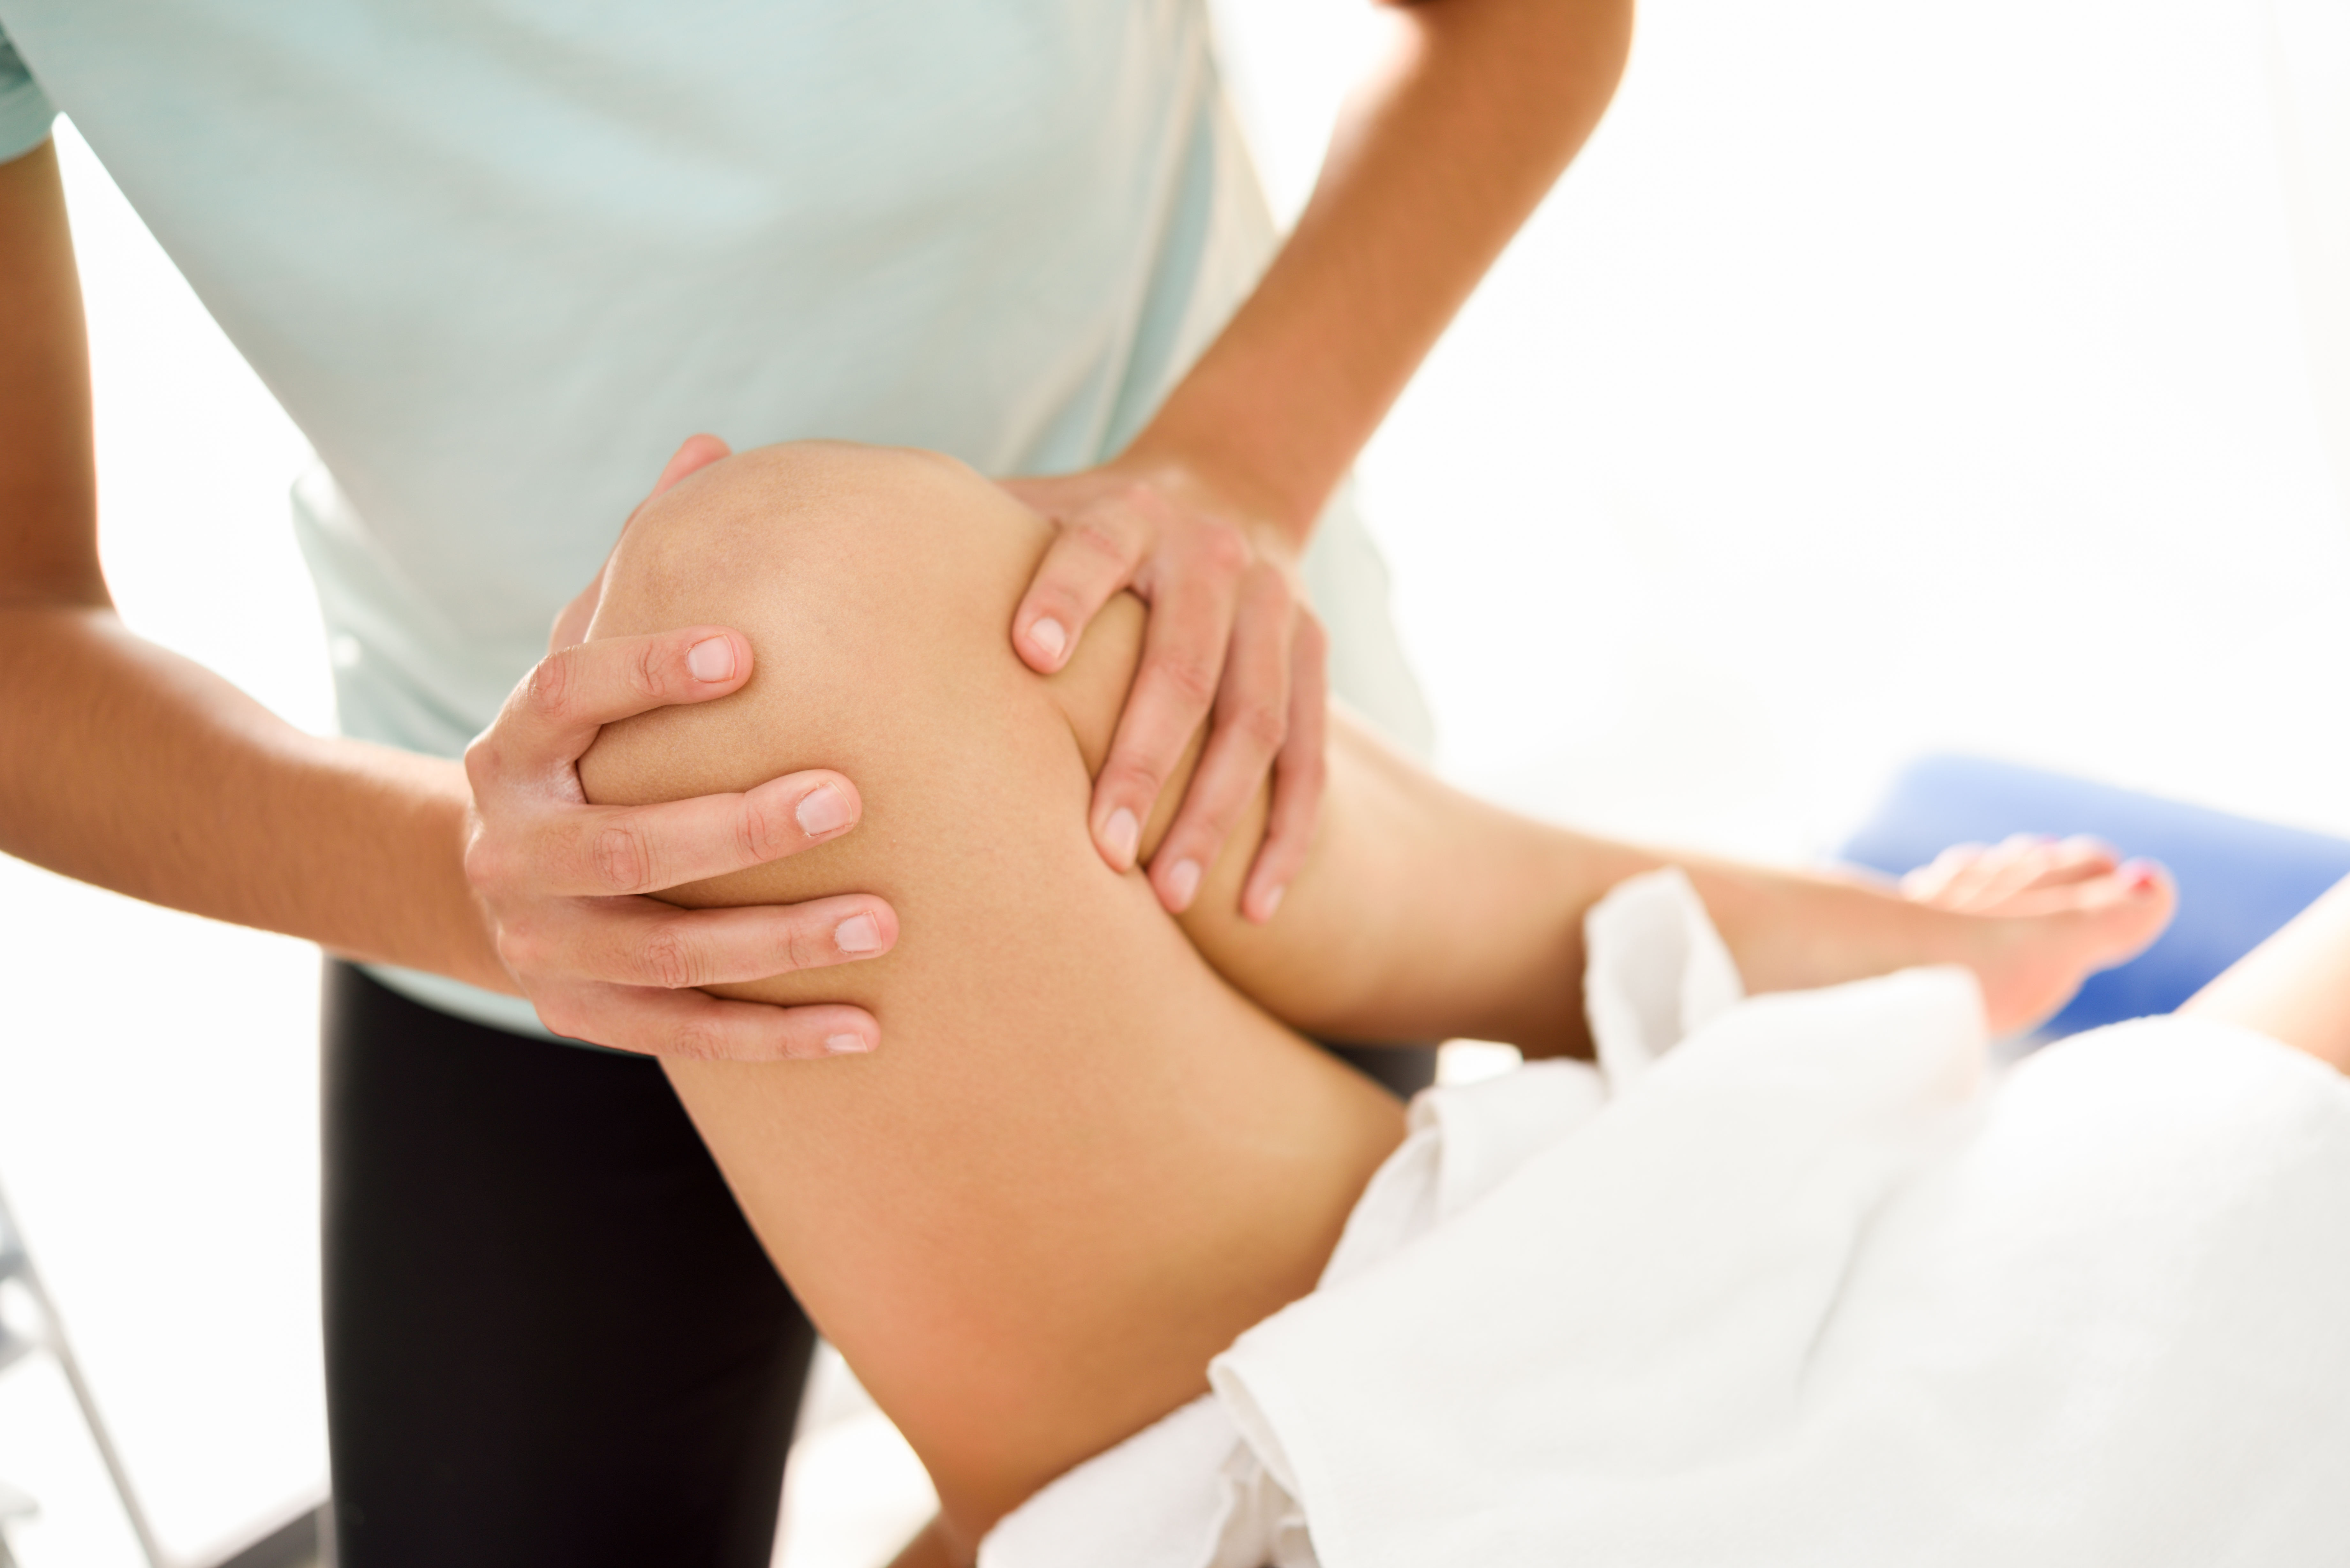 Medical massage at the leg in a physiotherapy center. Female physiotherapist inspecting her patient. Close-up photograph.